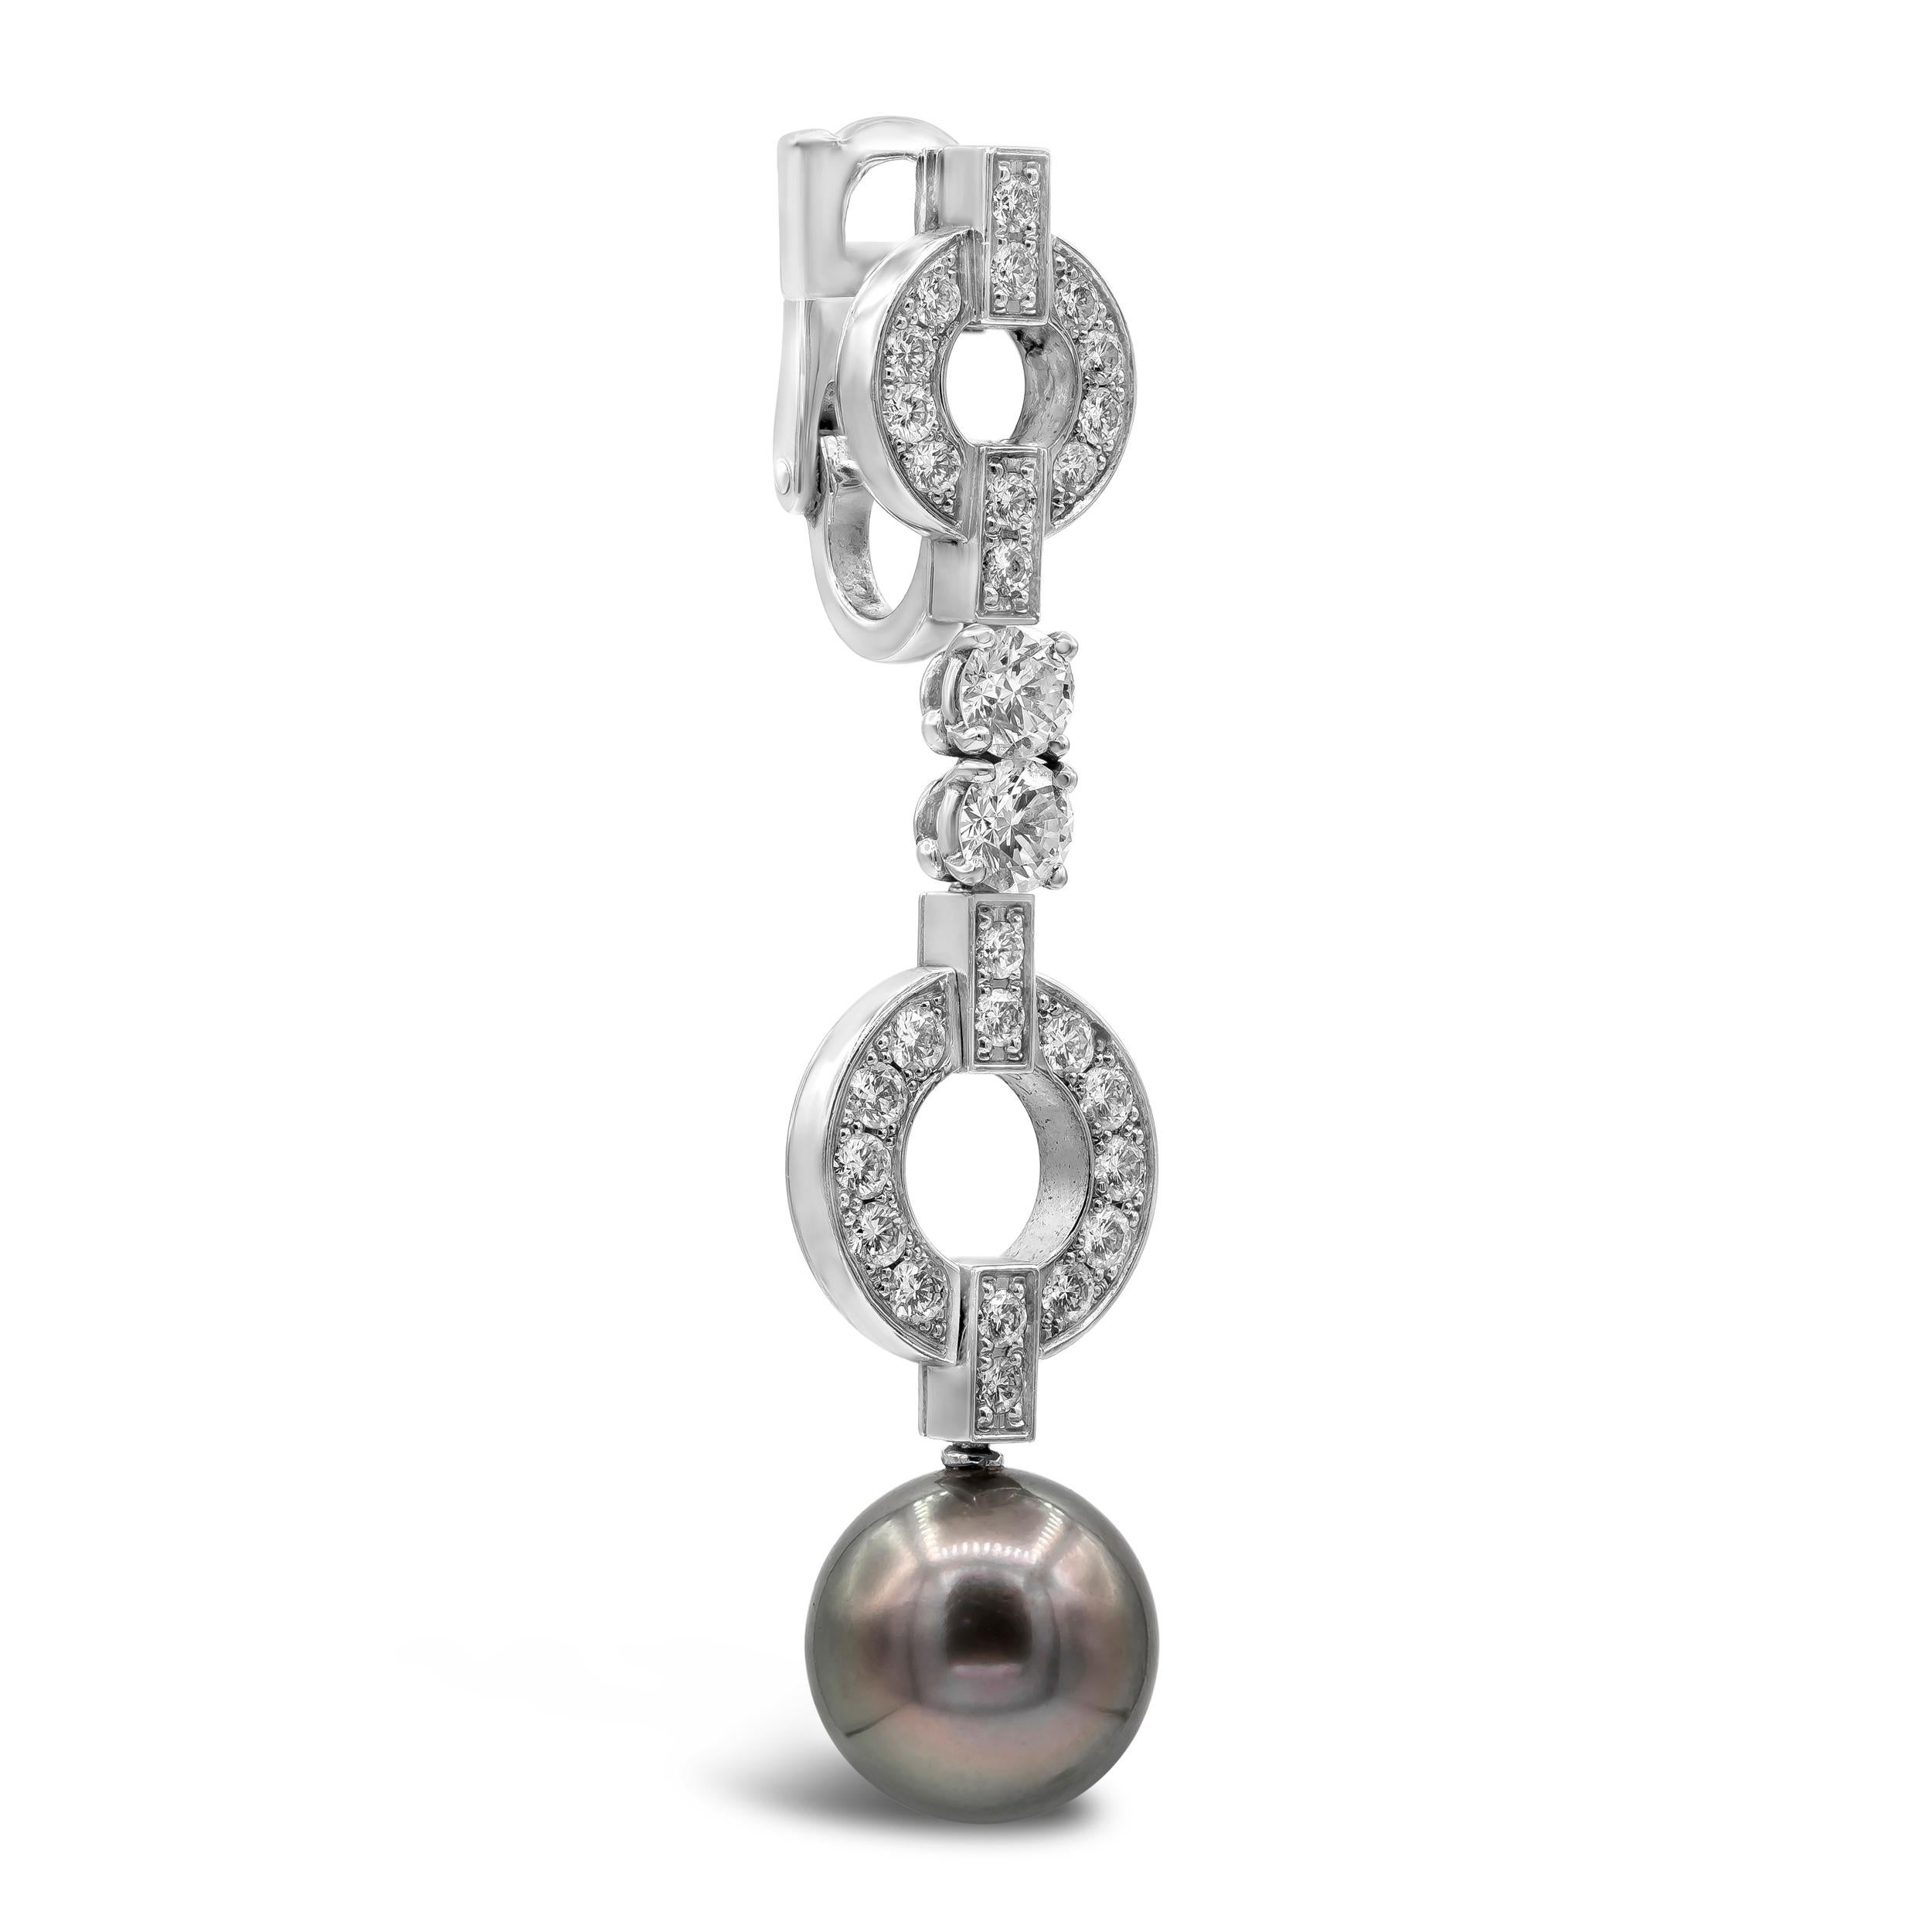 A stunning pair of Cartier Himalia diamond drop earrings featuring Tahitian pearls suspended in a diamond encrusted 18k White Gold mounting. Comes with original Cartier box and certificate of authenticity from Cartier. The earrings have a length of